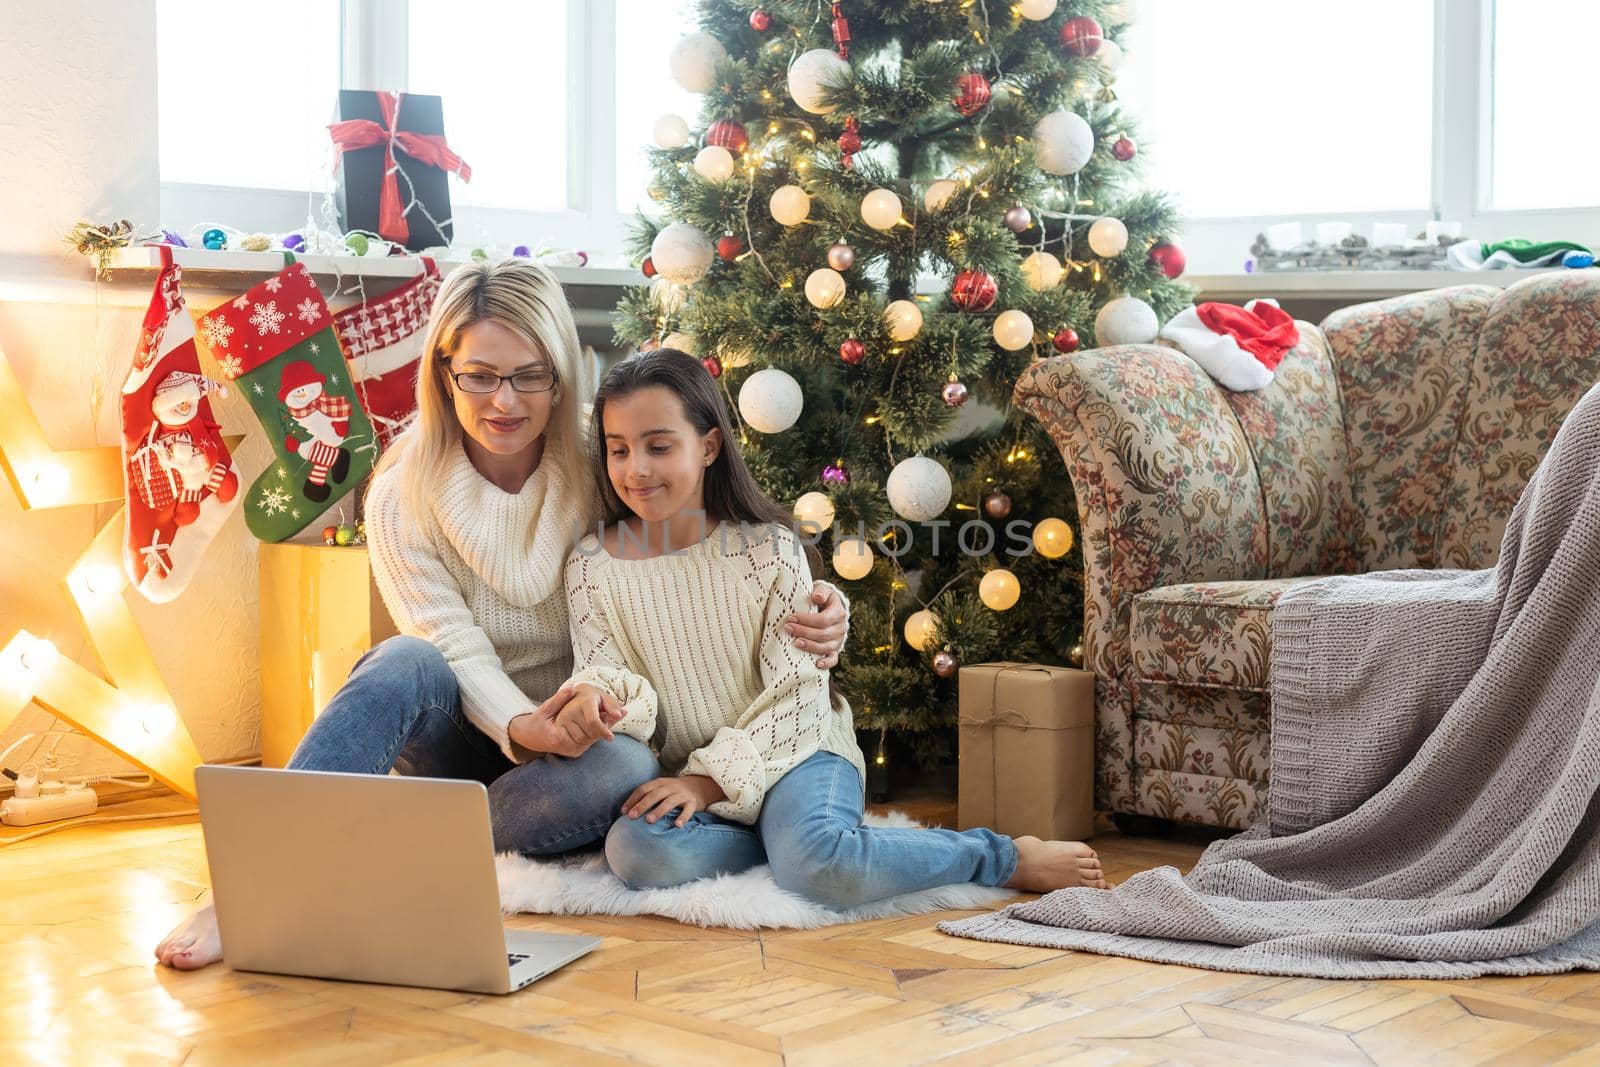 Indoor shot of beautiful happy young woman shopping online on laptop in cozy Christmas interior. Mother on the floor next the Christmas tree and sofa and daughter embrace her, shopping gifts. by Andelov13